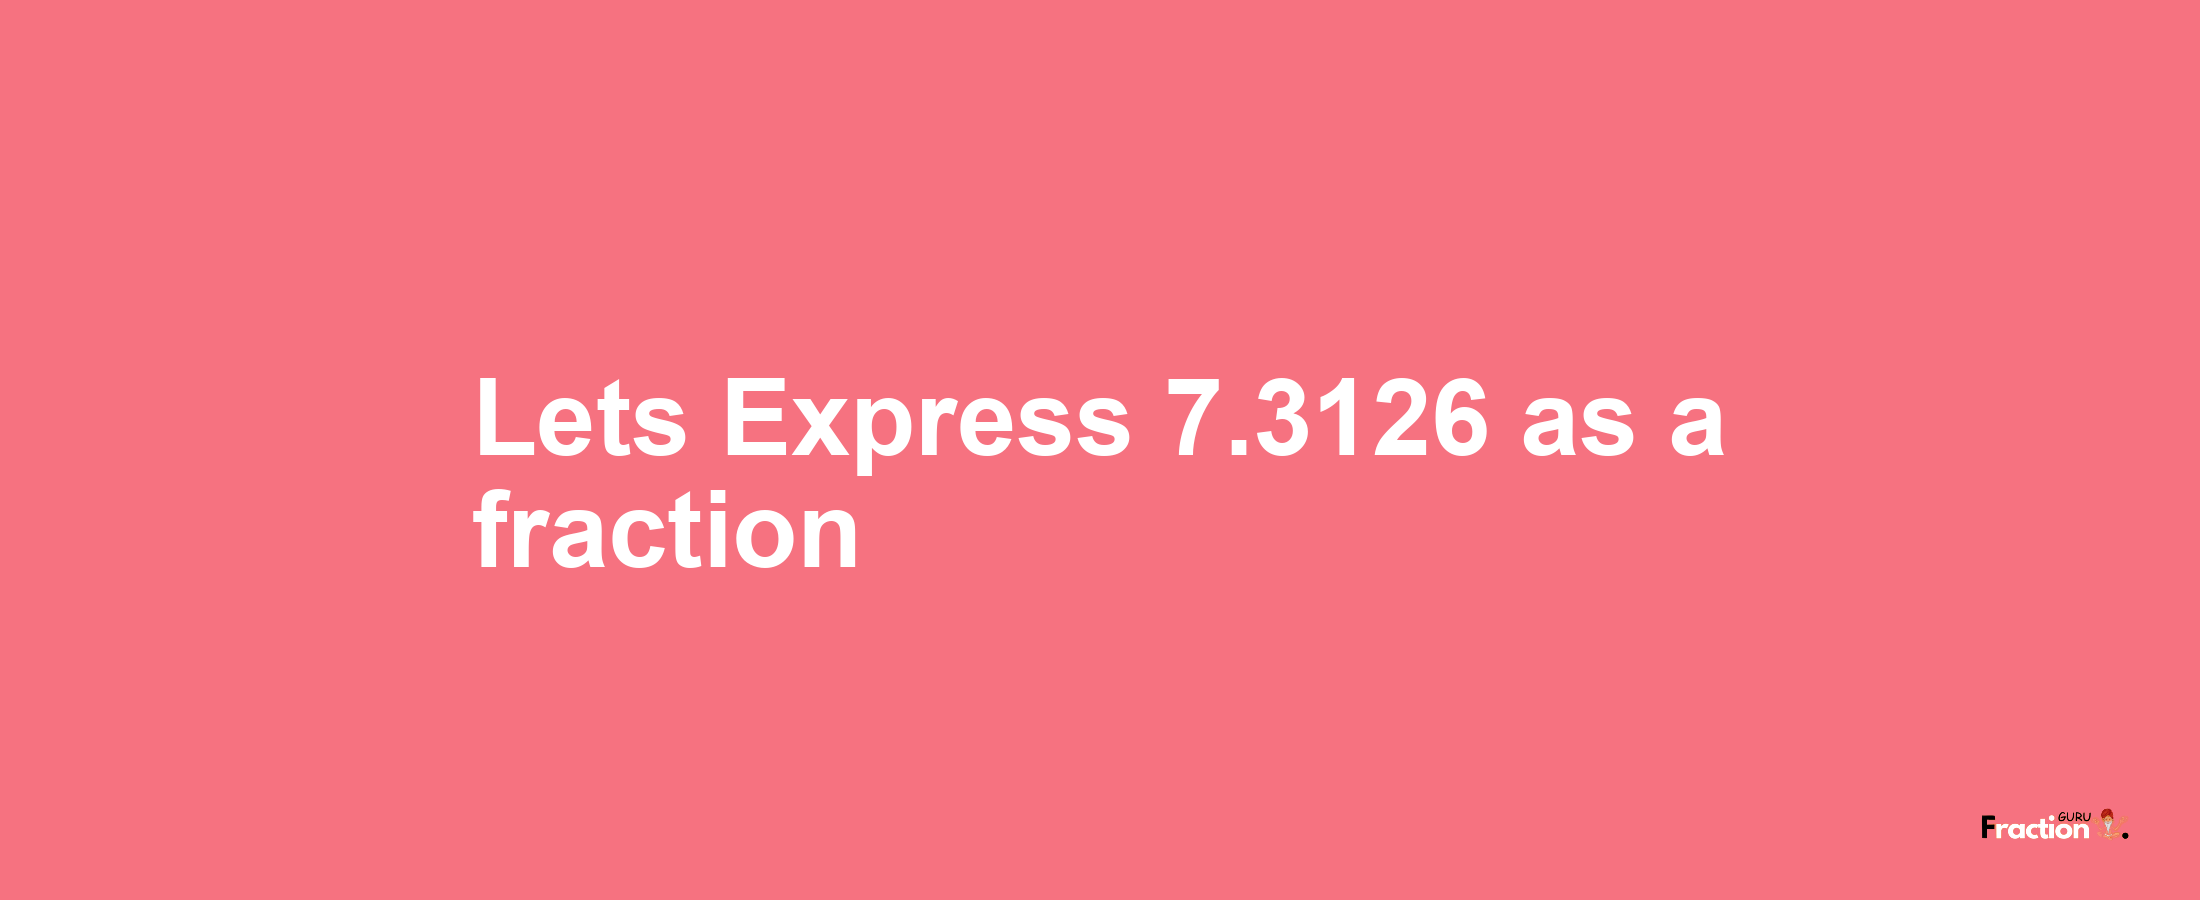 Lets Express 7.3126 as afraction